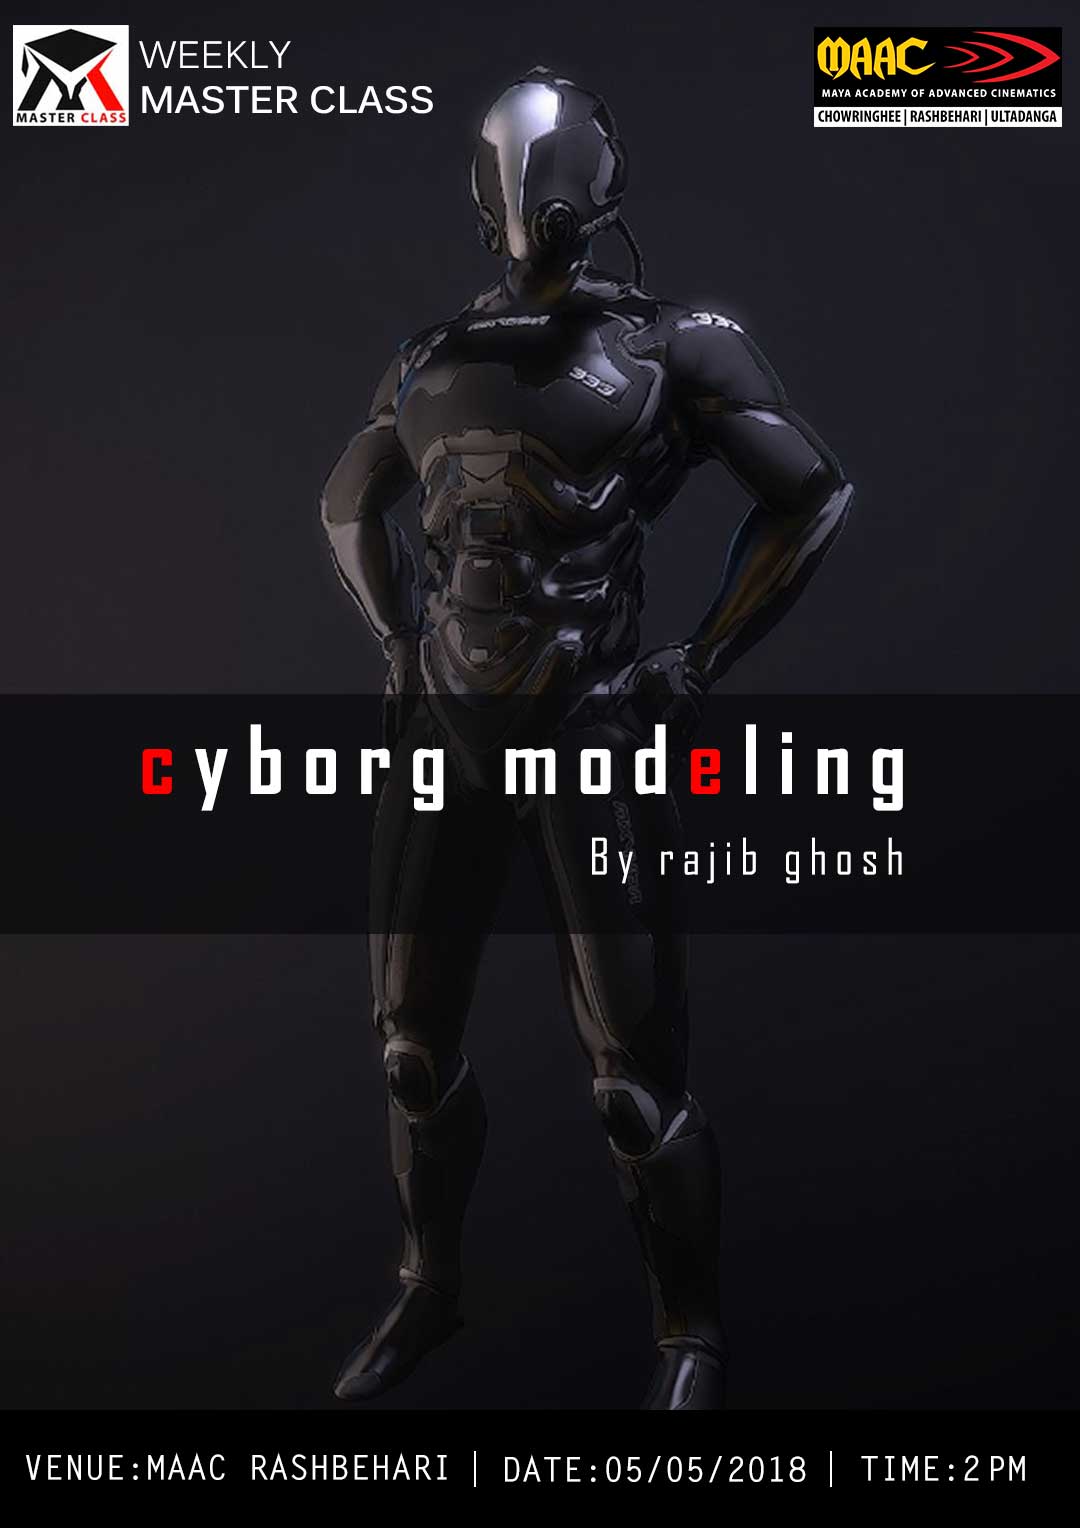 Weekly Master Class on cyborg modeling